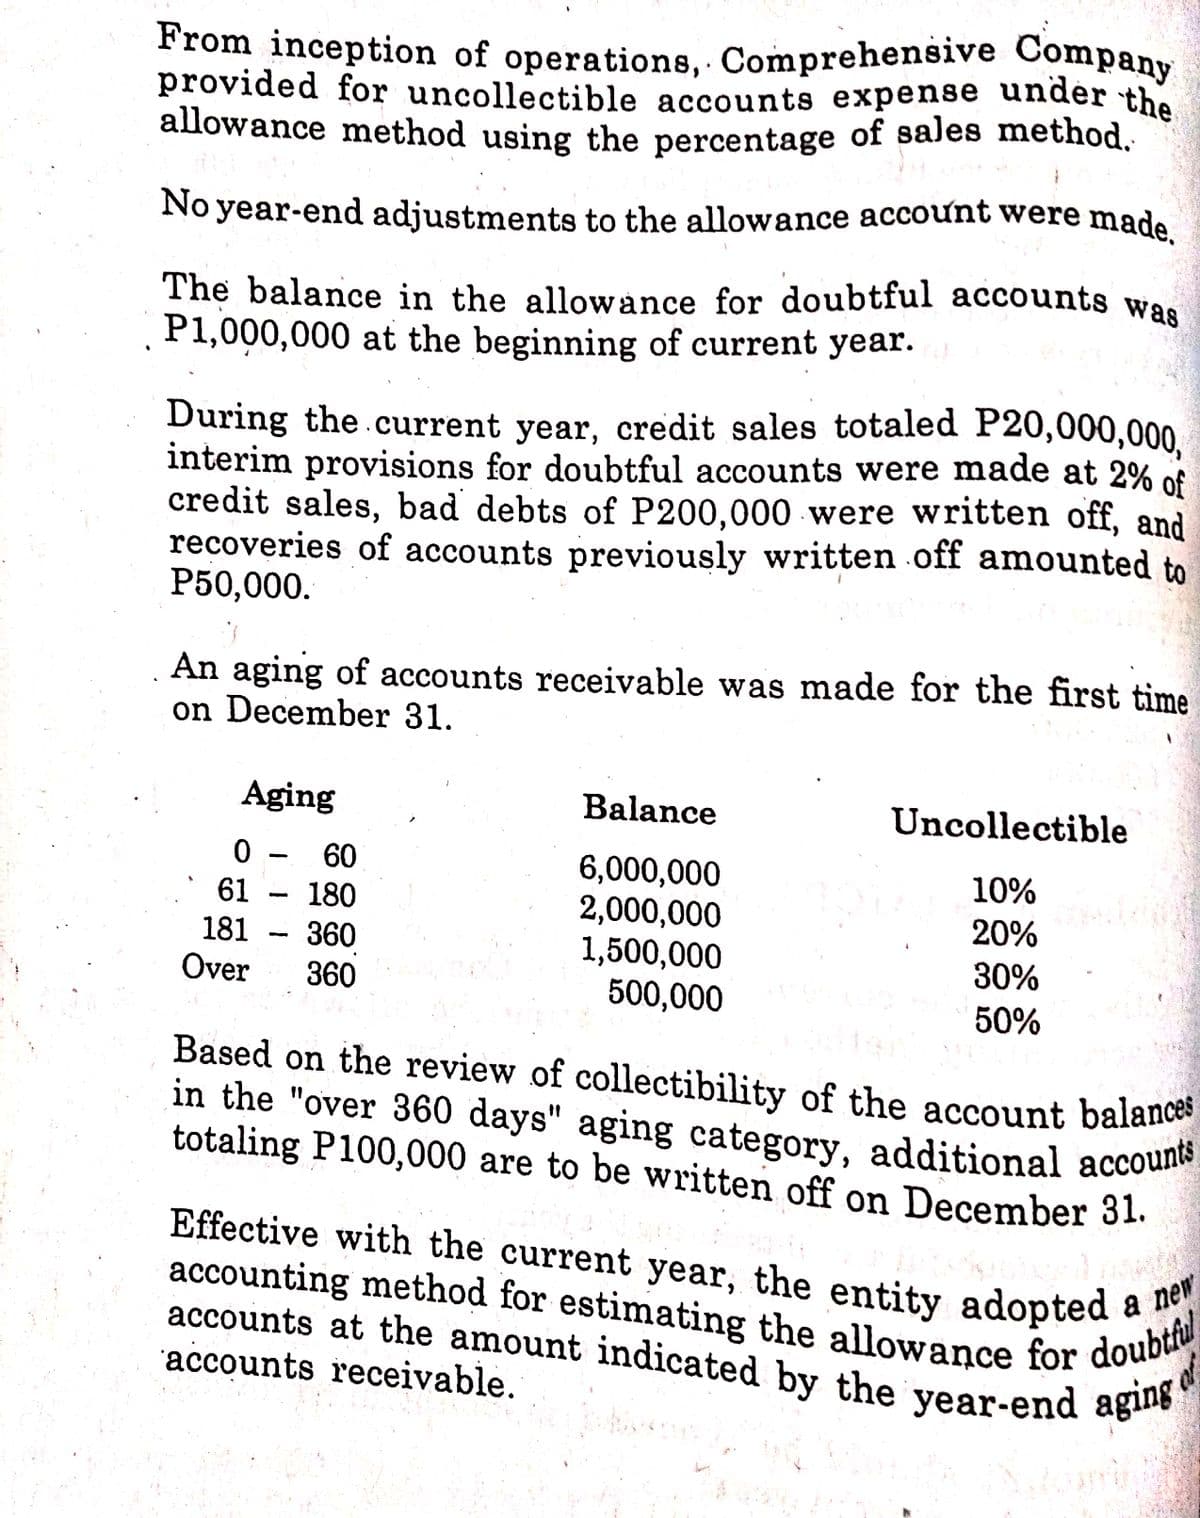 No year-end adjustments to the allowance account were made.
During the.current year, credit sales totaled P20,000,000,
accounts at the amount indicated by the year-end aging
From inception of operations, Comprehensive Company
in the "over 360 days" aging category, additional accounts
Effective with the current year, the entity adopted a new
accounting method for estimating the allowance for doubtful
provided for uncollectible accounts expense under the
The balance in the allowance for doubtful accounts was
allowance method using the percentage of sales method.
No year-end adjustments to the allowance account were made
The balance in the allowance for doubtful accounts was
P1,000,000 at the beginning of current year.
During the.current year, credit sales totaled P20,000,000
interim provisions for doubtful accounts were made at 2% of
credit sales, bad debts of P200,000 were written off, and
recoveries of accounts previously written off amounted to
P50,000.
An aging of accounts receivable was made for the first time
on December 31.
Aging
Balance
Uncollectible
0 -
60
6,000,000
2,000,000
1,500,000
500,000
10%
61 – 180
20%
181
Over
360
30%
360
50%
Based on the review of collectibility of the account balances
in the "over 360 days" aging category, additional accoune
totaling P100,000 are to be written off on December 31.
Effective with the current year, the entity adopted aA
accounting method for estimating the allowance for doube
accounts at the amount indicated by the vear-end agne
'accounts receivable.
